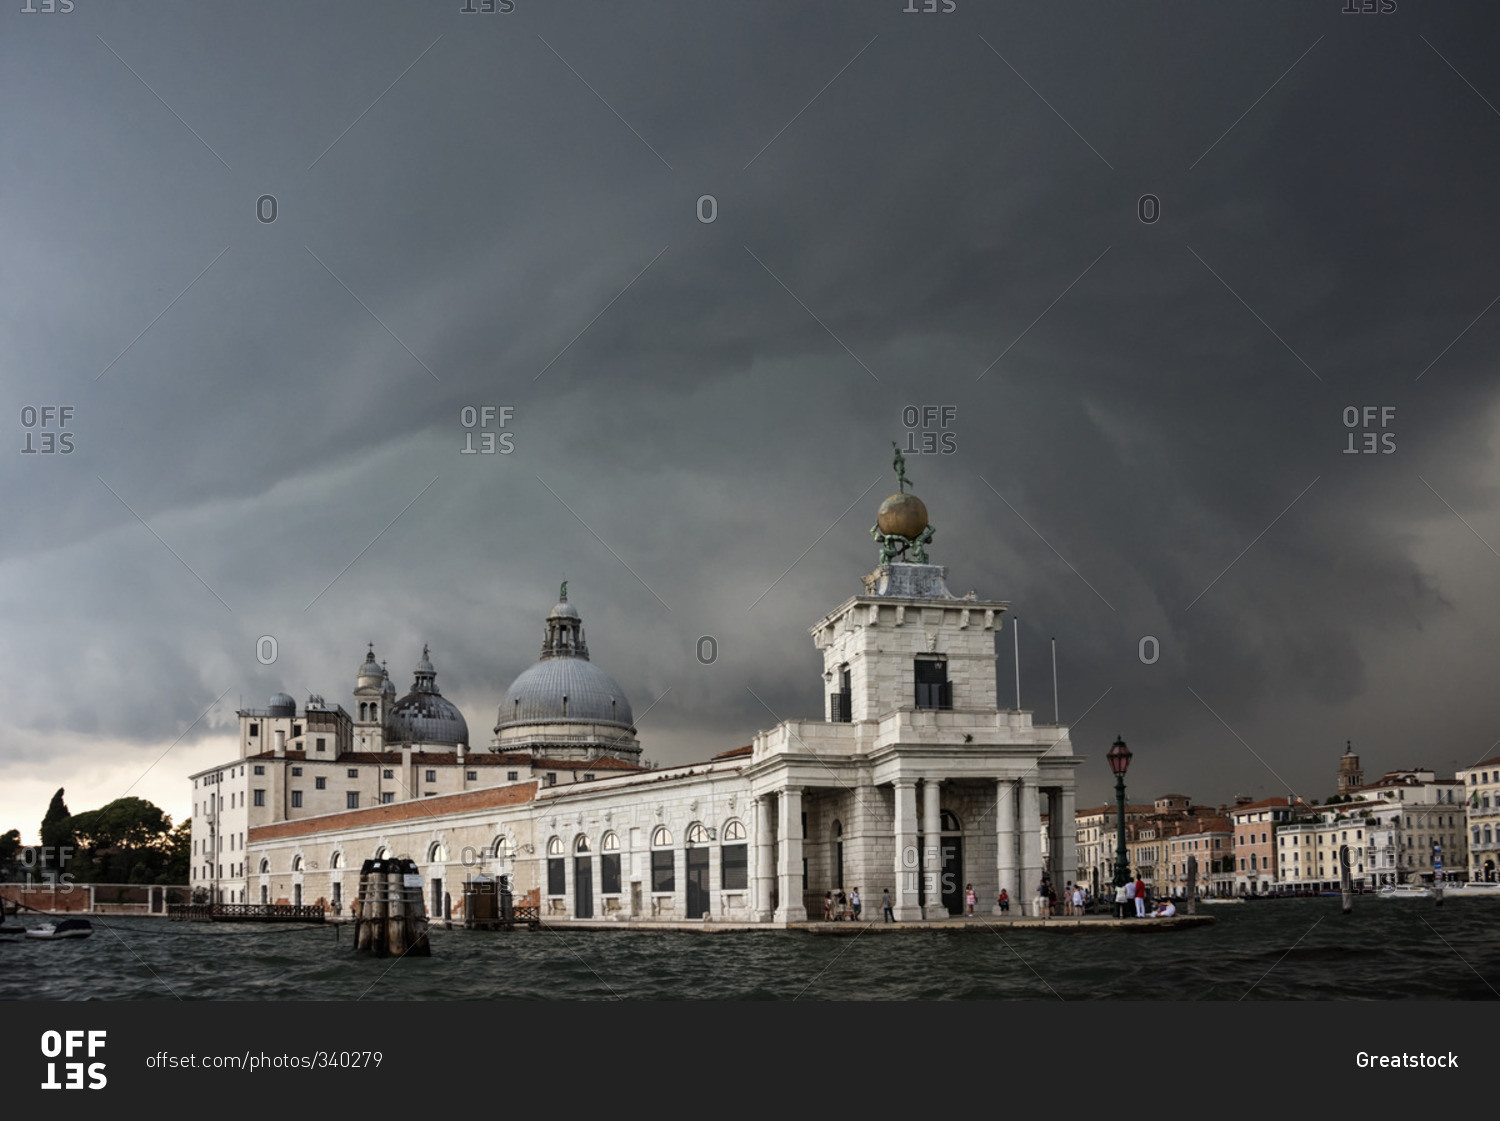 A thunderstorm looming over the Cathedral of Santa Maria della Salute, Venice